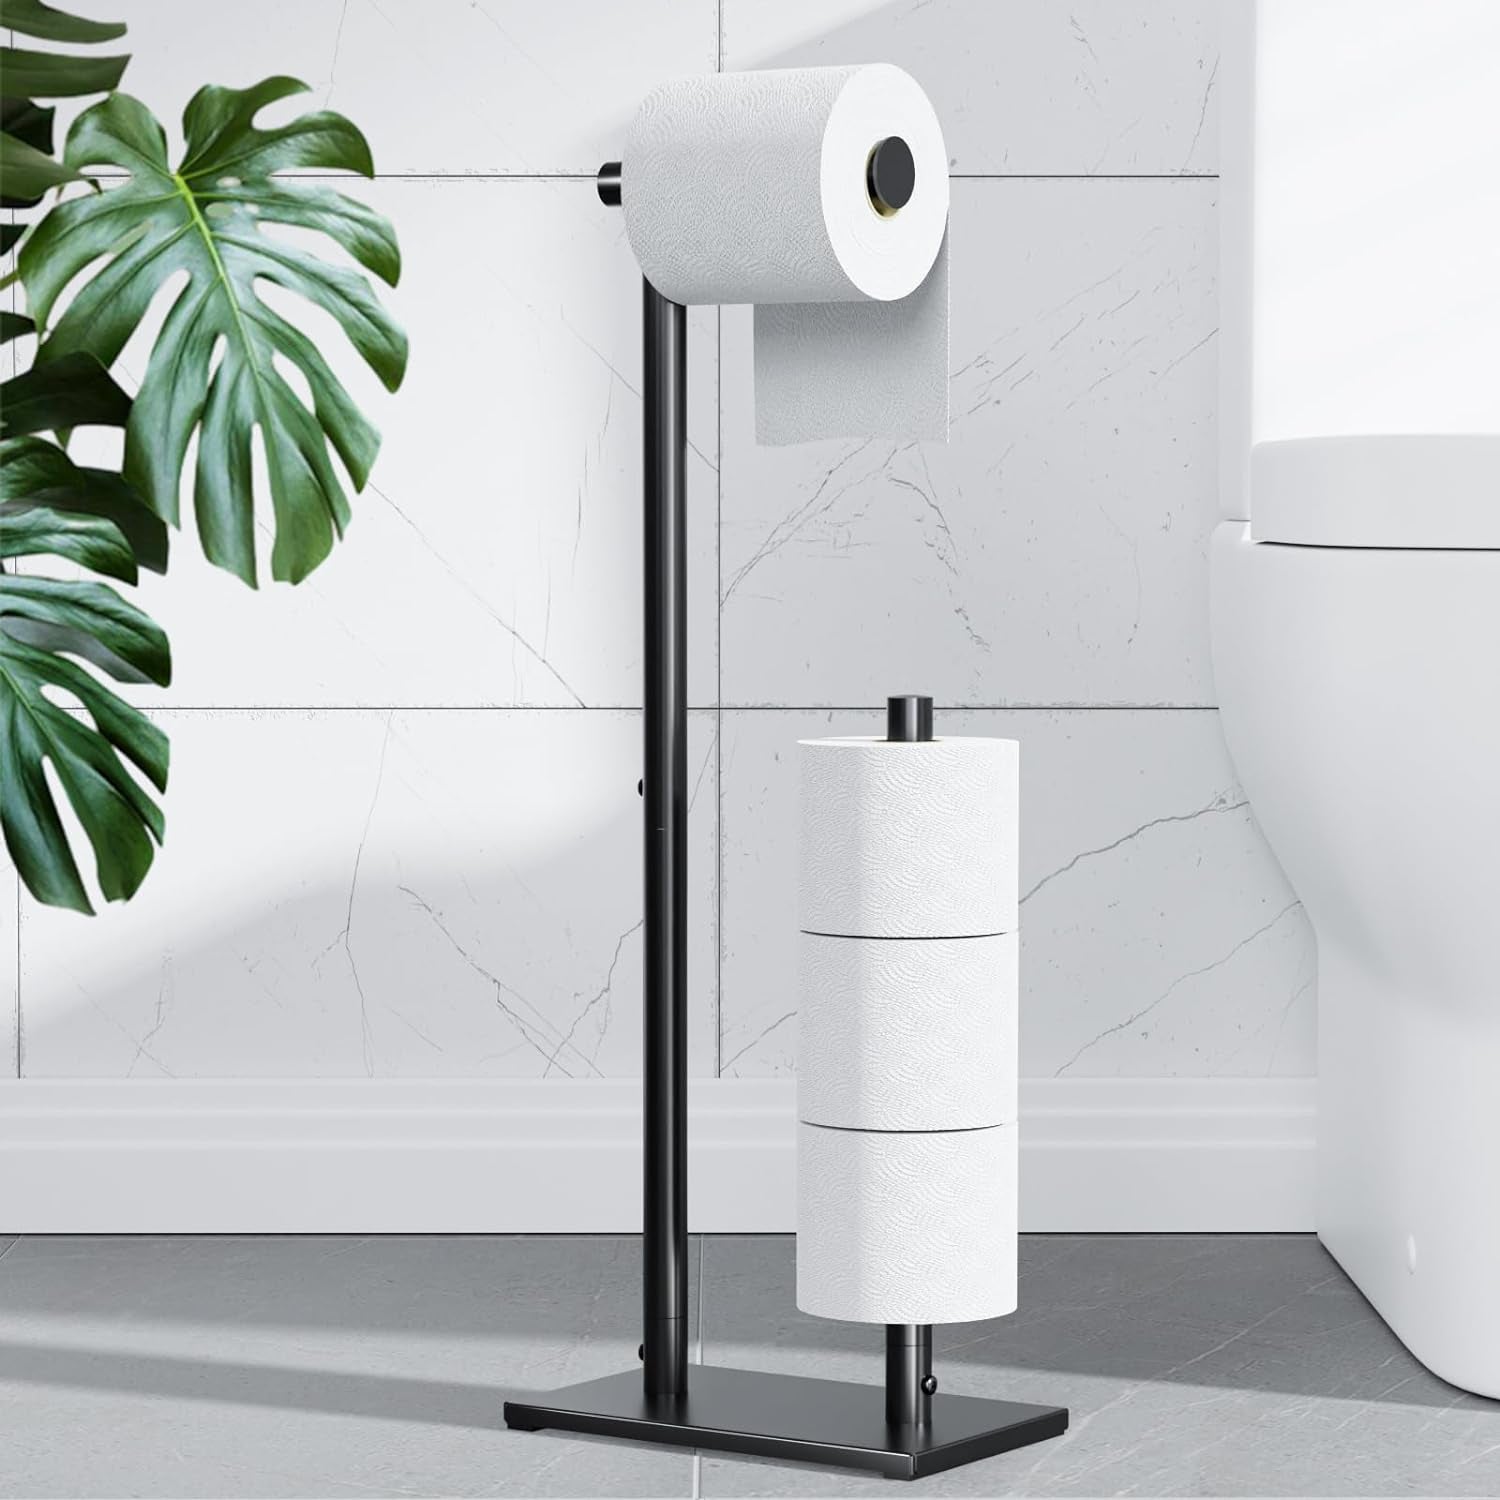 Toilet Paper Holder Free Standing - Large Capacity Toilet Paper Roll Holder for 4 Rolls, Rustproof Toilet Paper Stand with Non-Slip Stable Base, Black Toilet Paper Holder Stand for Bathroom